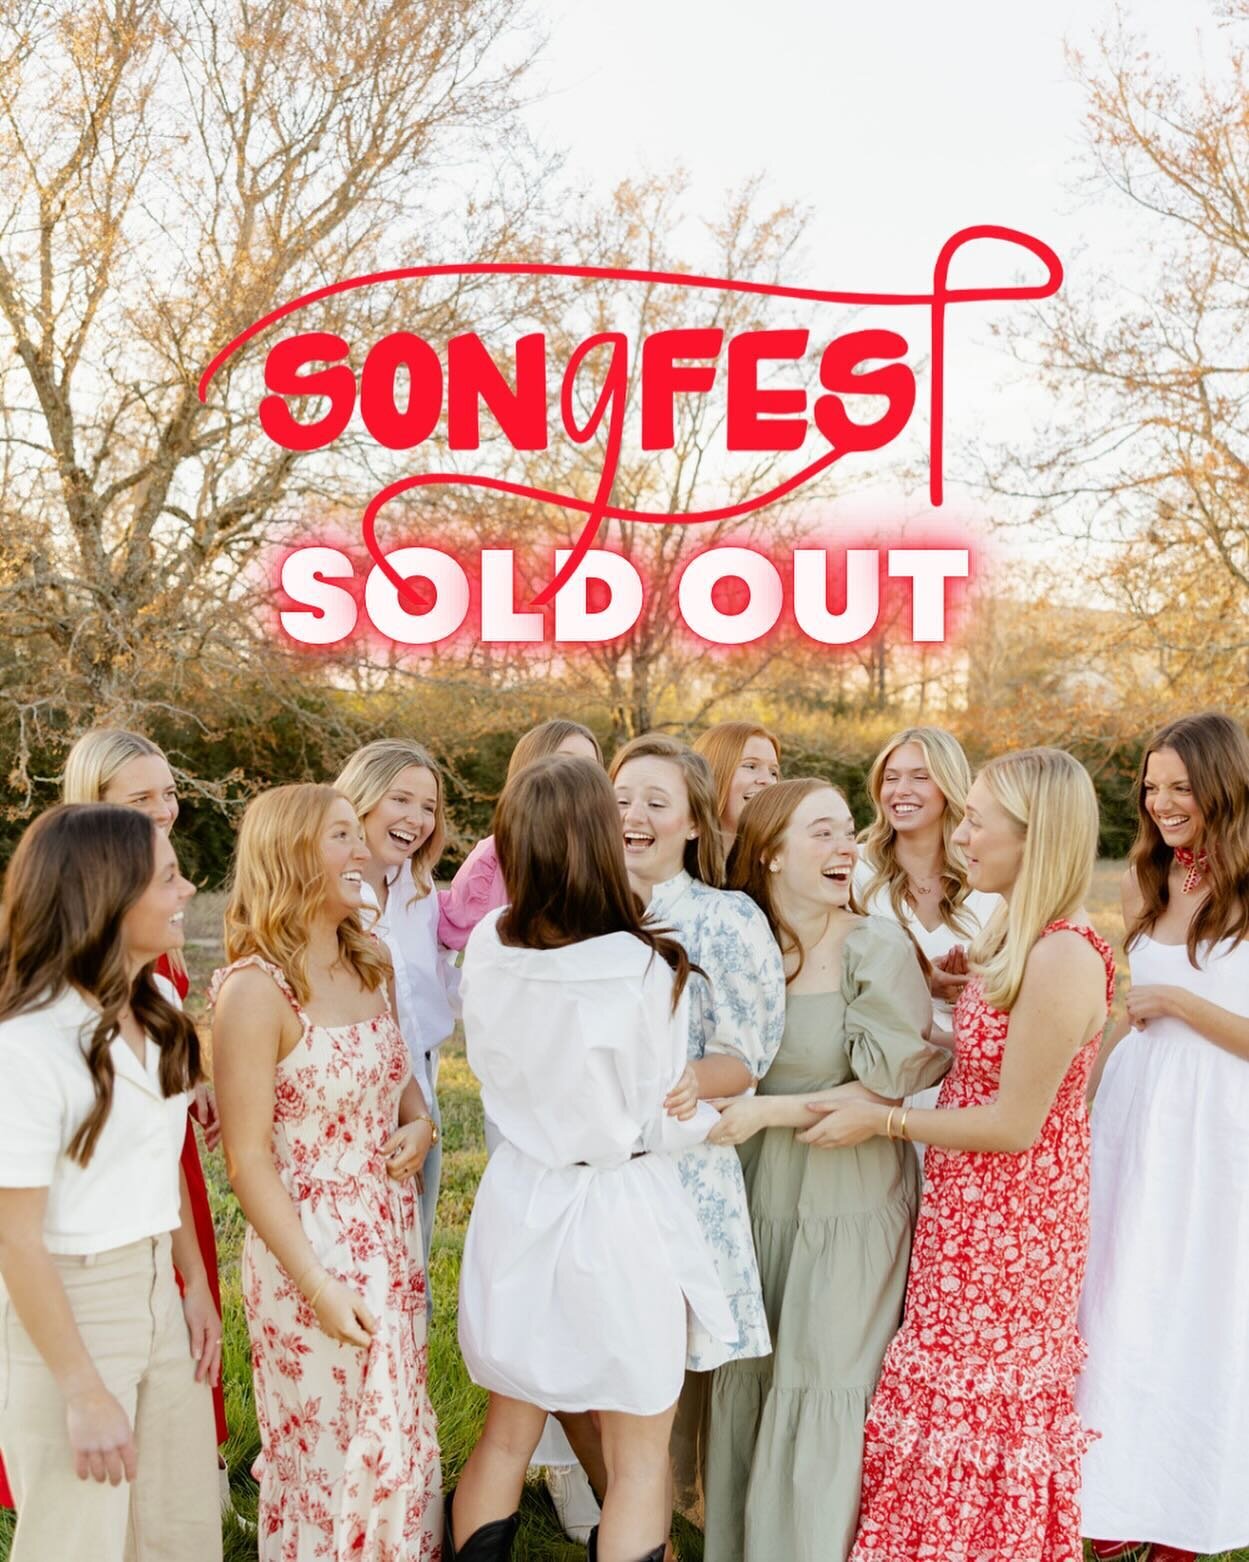 ‼️SONGFEST 2023 IS SOLD OUT‼️

We cannot thank everyone enough- we will see everyone OCT 19-21🌶️ Continue to check our website for information regarding raffle tickets and more!